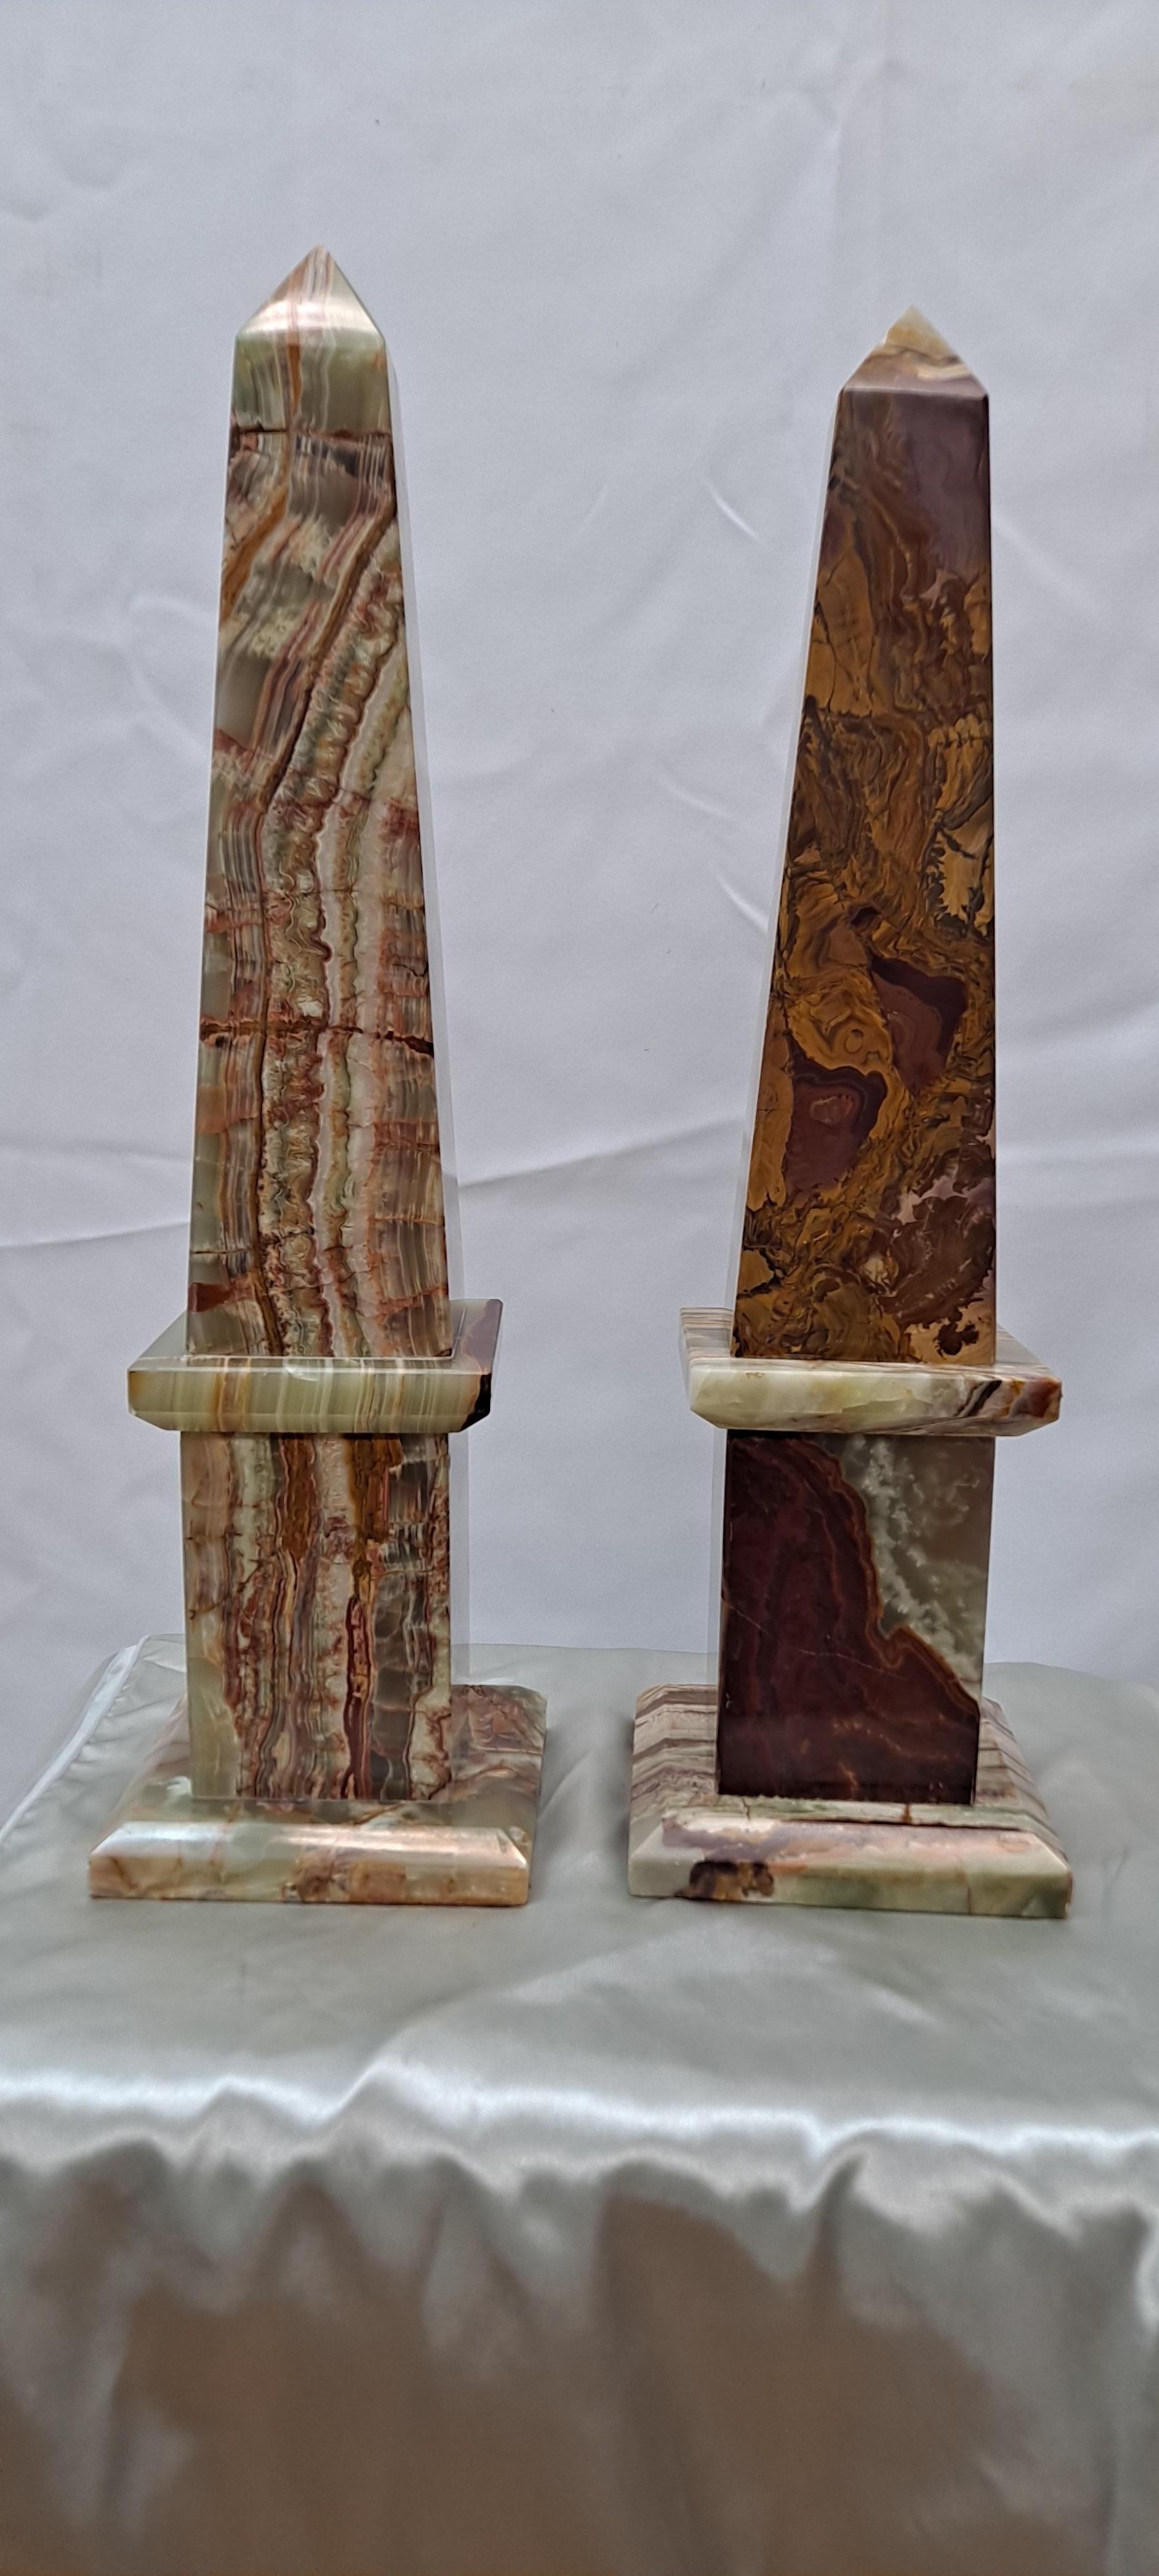 Beautiful Pair of Grand-Tour Style Polished Onyx Obelisks

5x5x19h